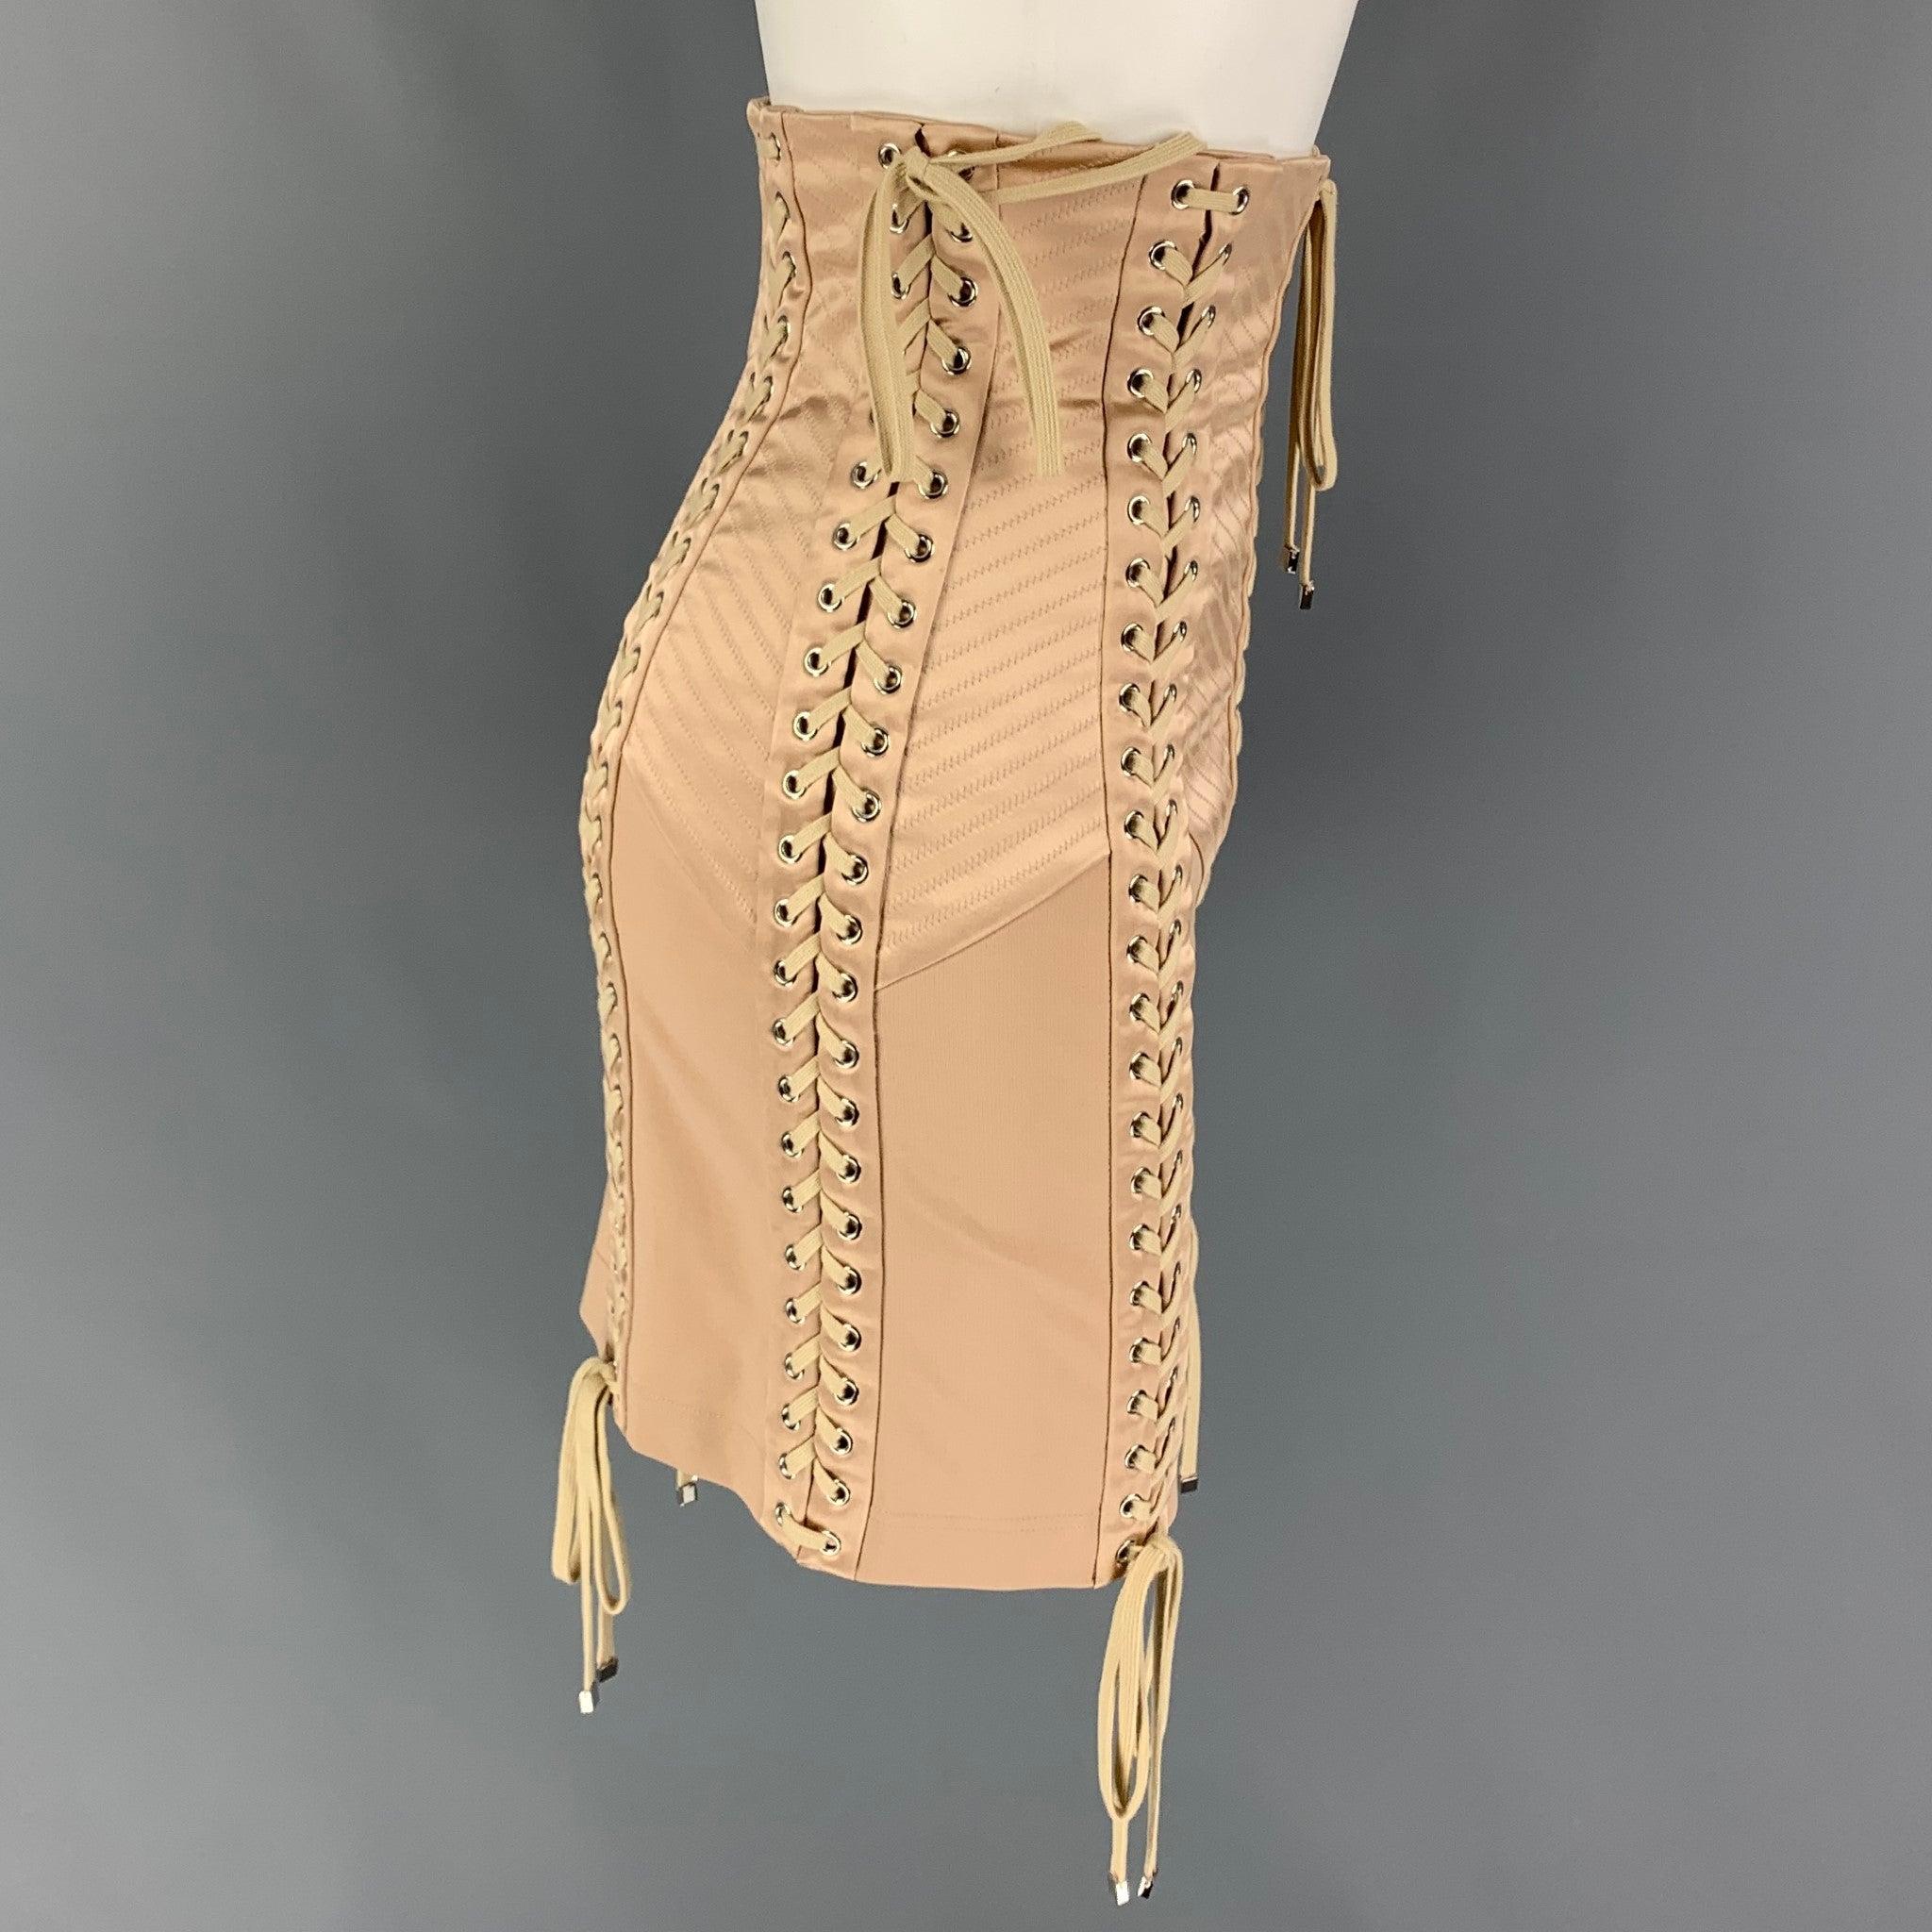 DOLCE & GABBANA skirt comes in a nude acetate blend featuring a corset inspired design, eyelets, lace details, and a back zip up closure. Made in Italy. Excellent
Pre-Owned Condition. 

Marked:   38 

Measurements: 
  Waist: 24 inches  Hip: 30